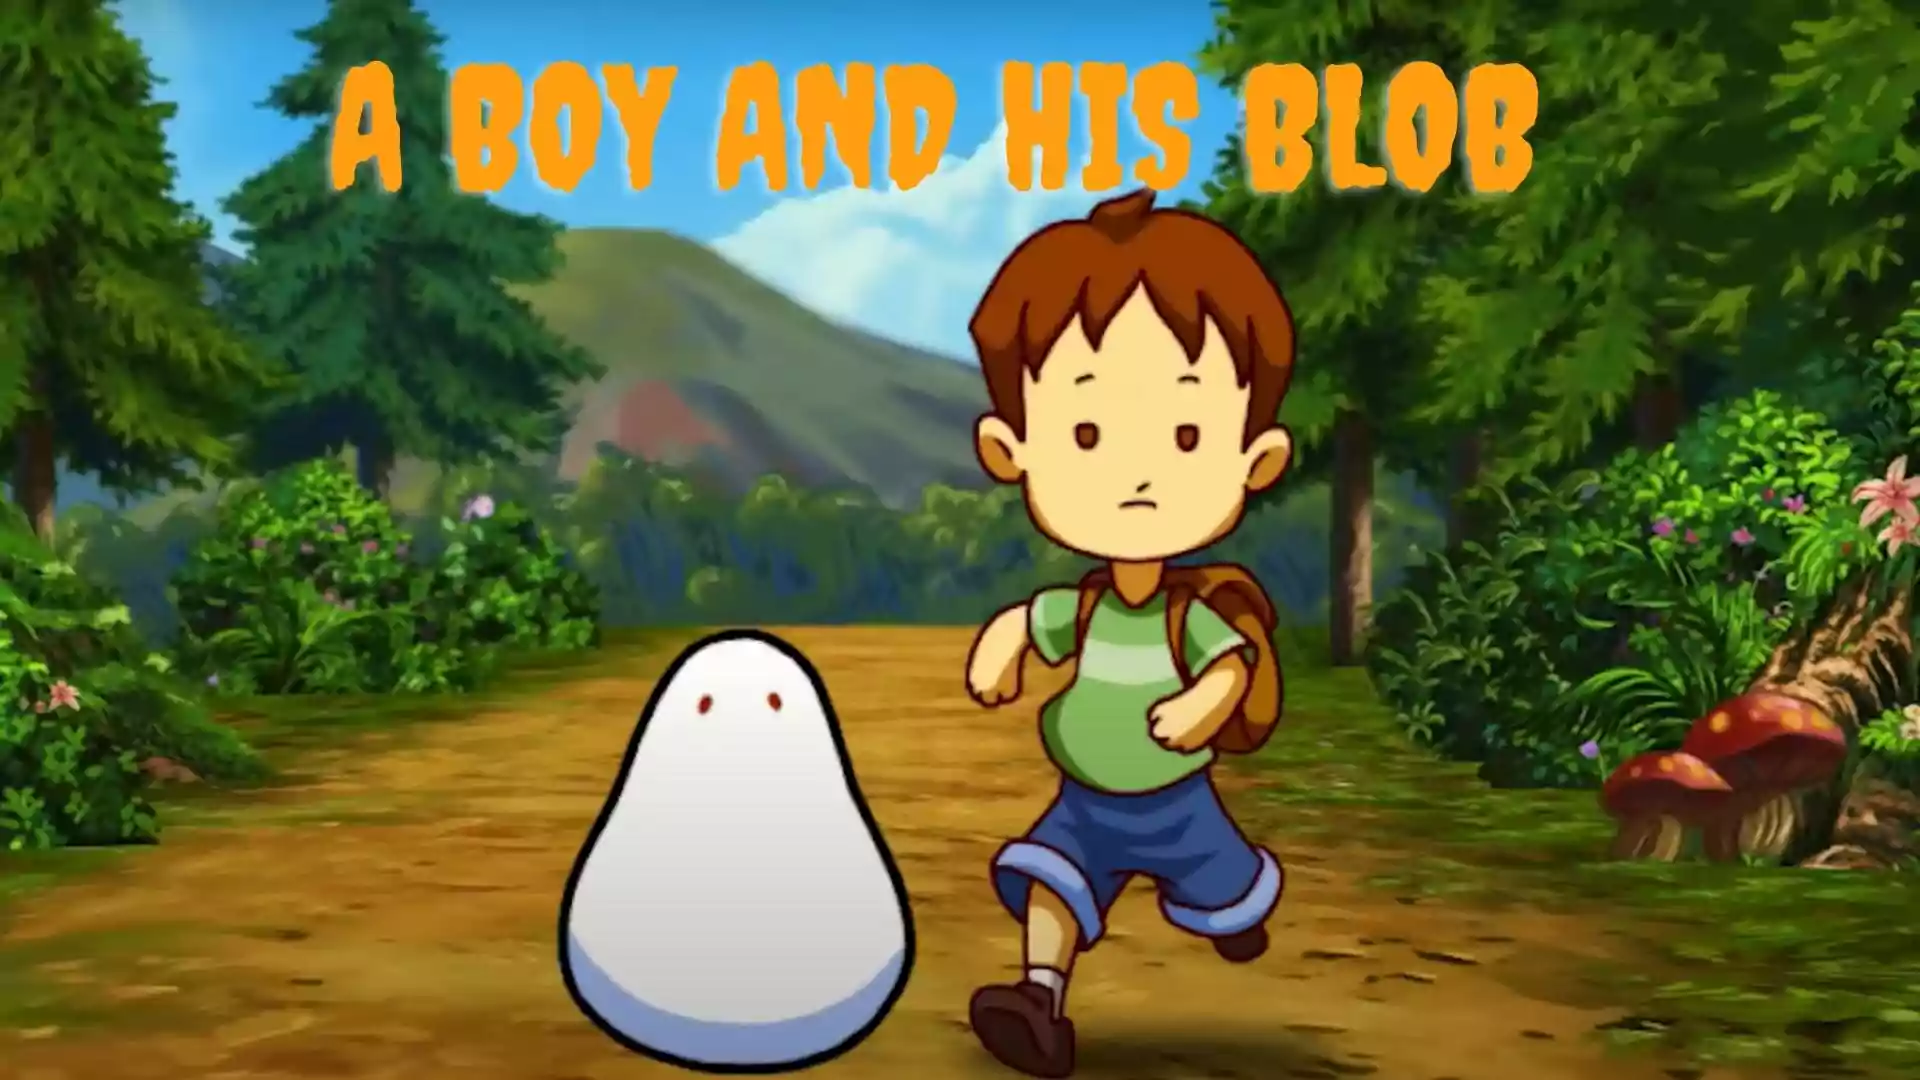 A Boy and His Blob Parents Guide and Age Rating